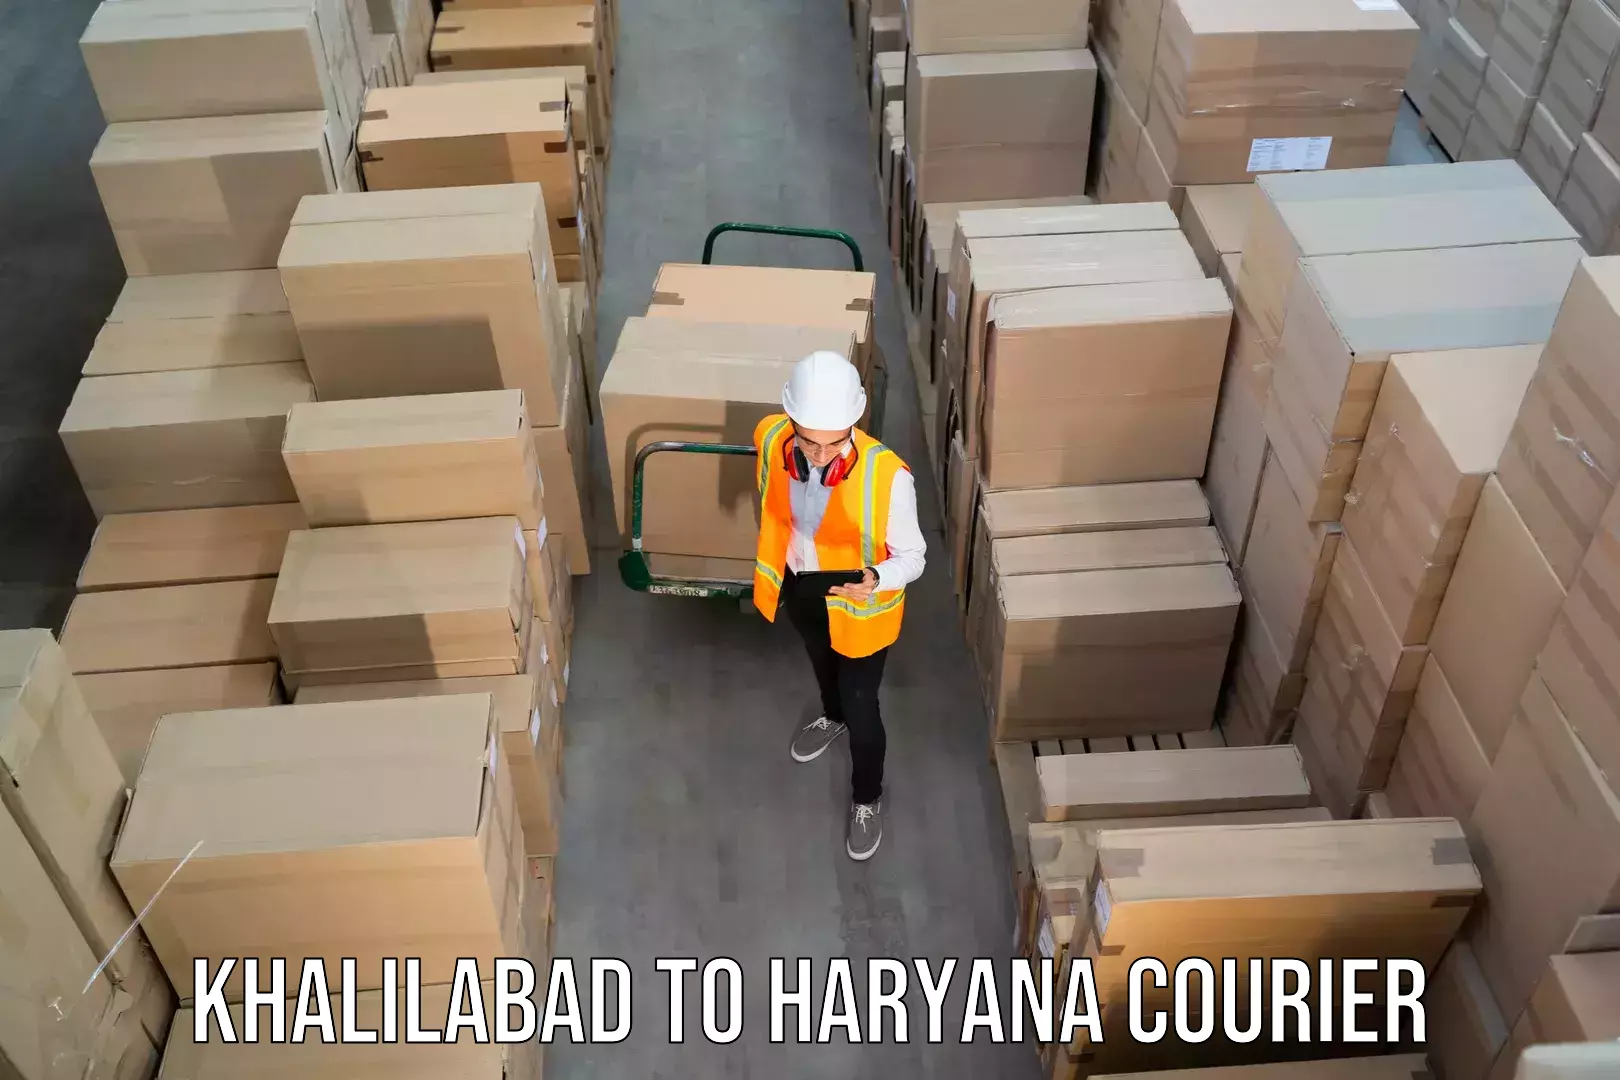 24/7 courier service in Khalilabad to Odhan